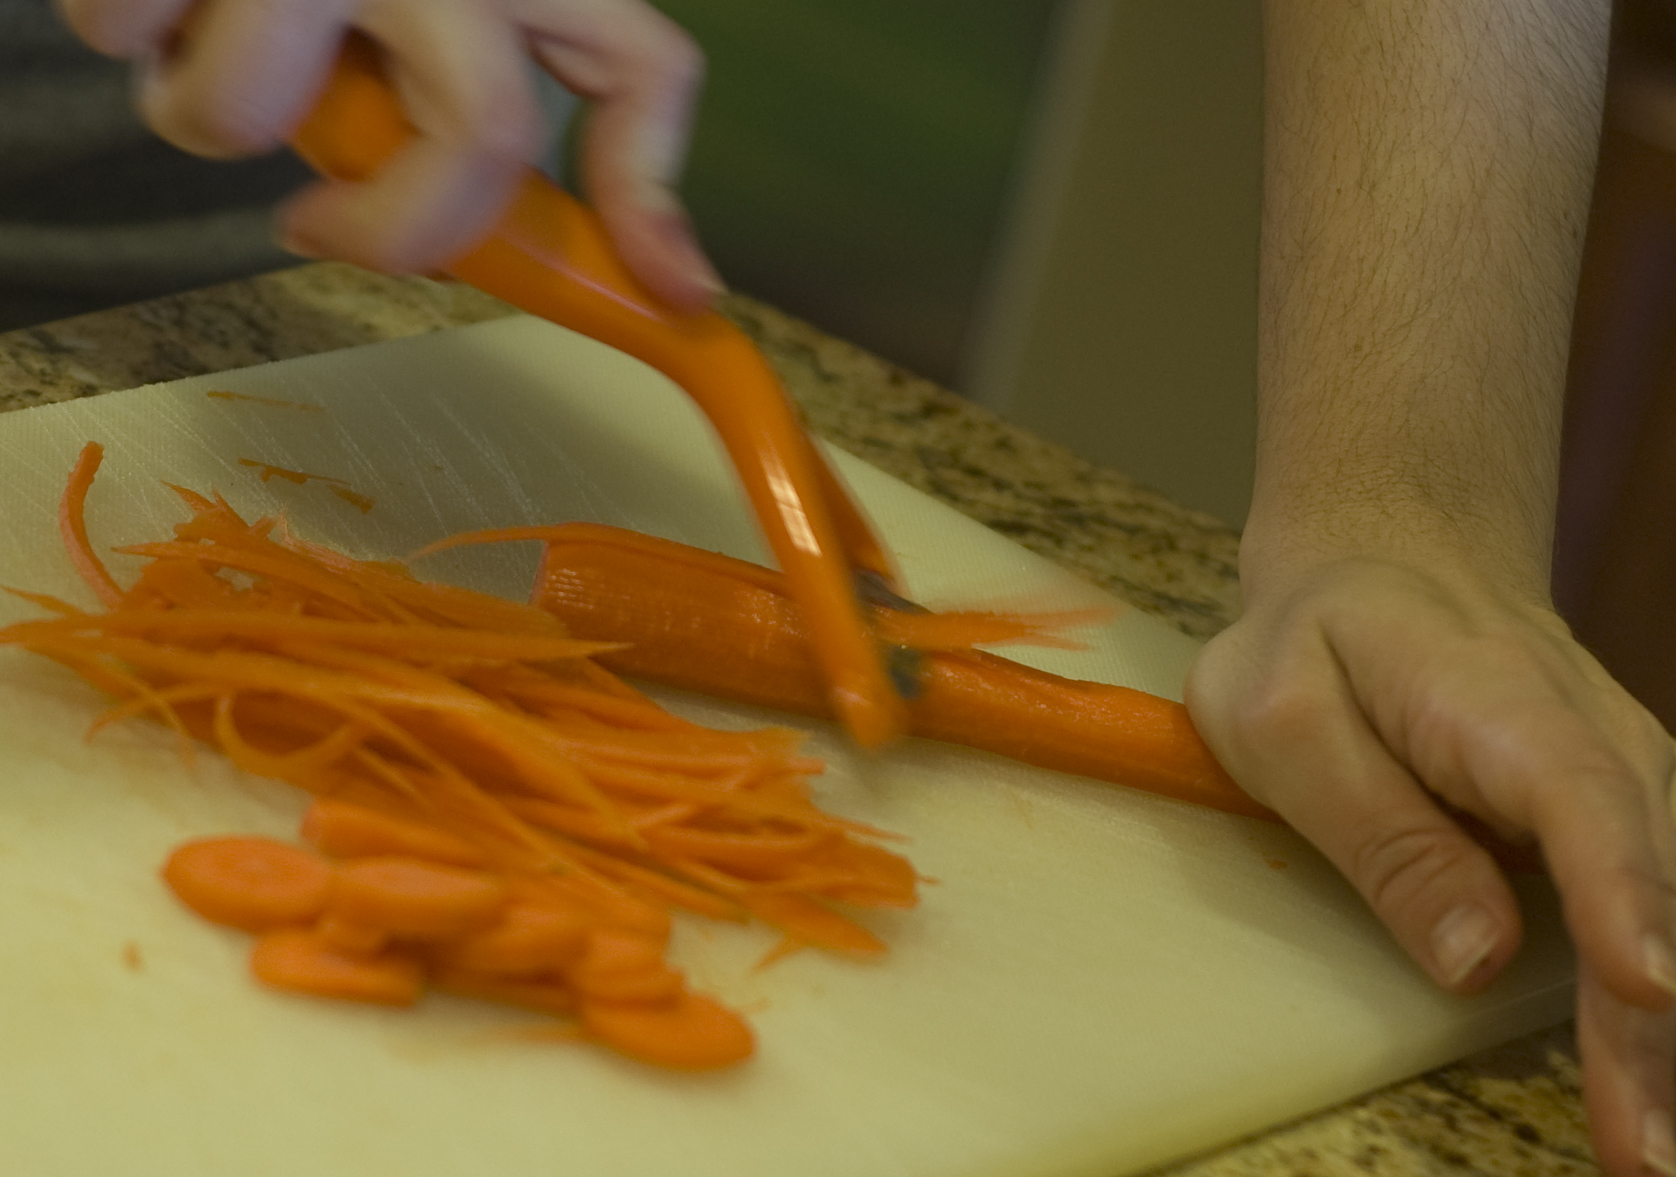 two hands holding orange utensils slicing and serving carrots